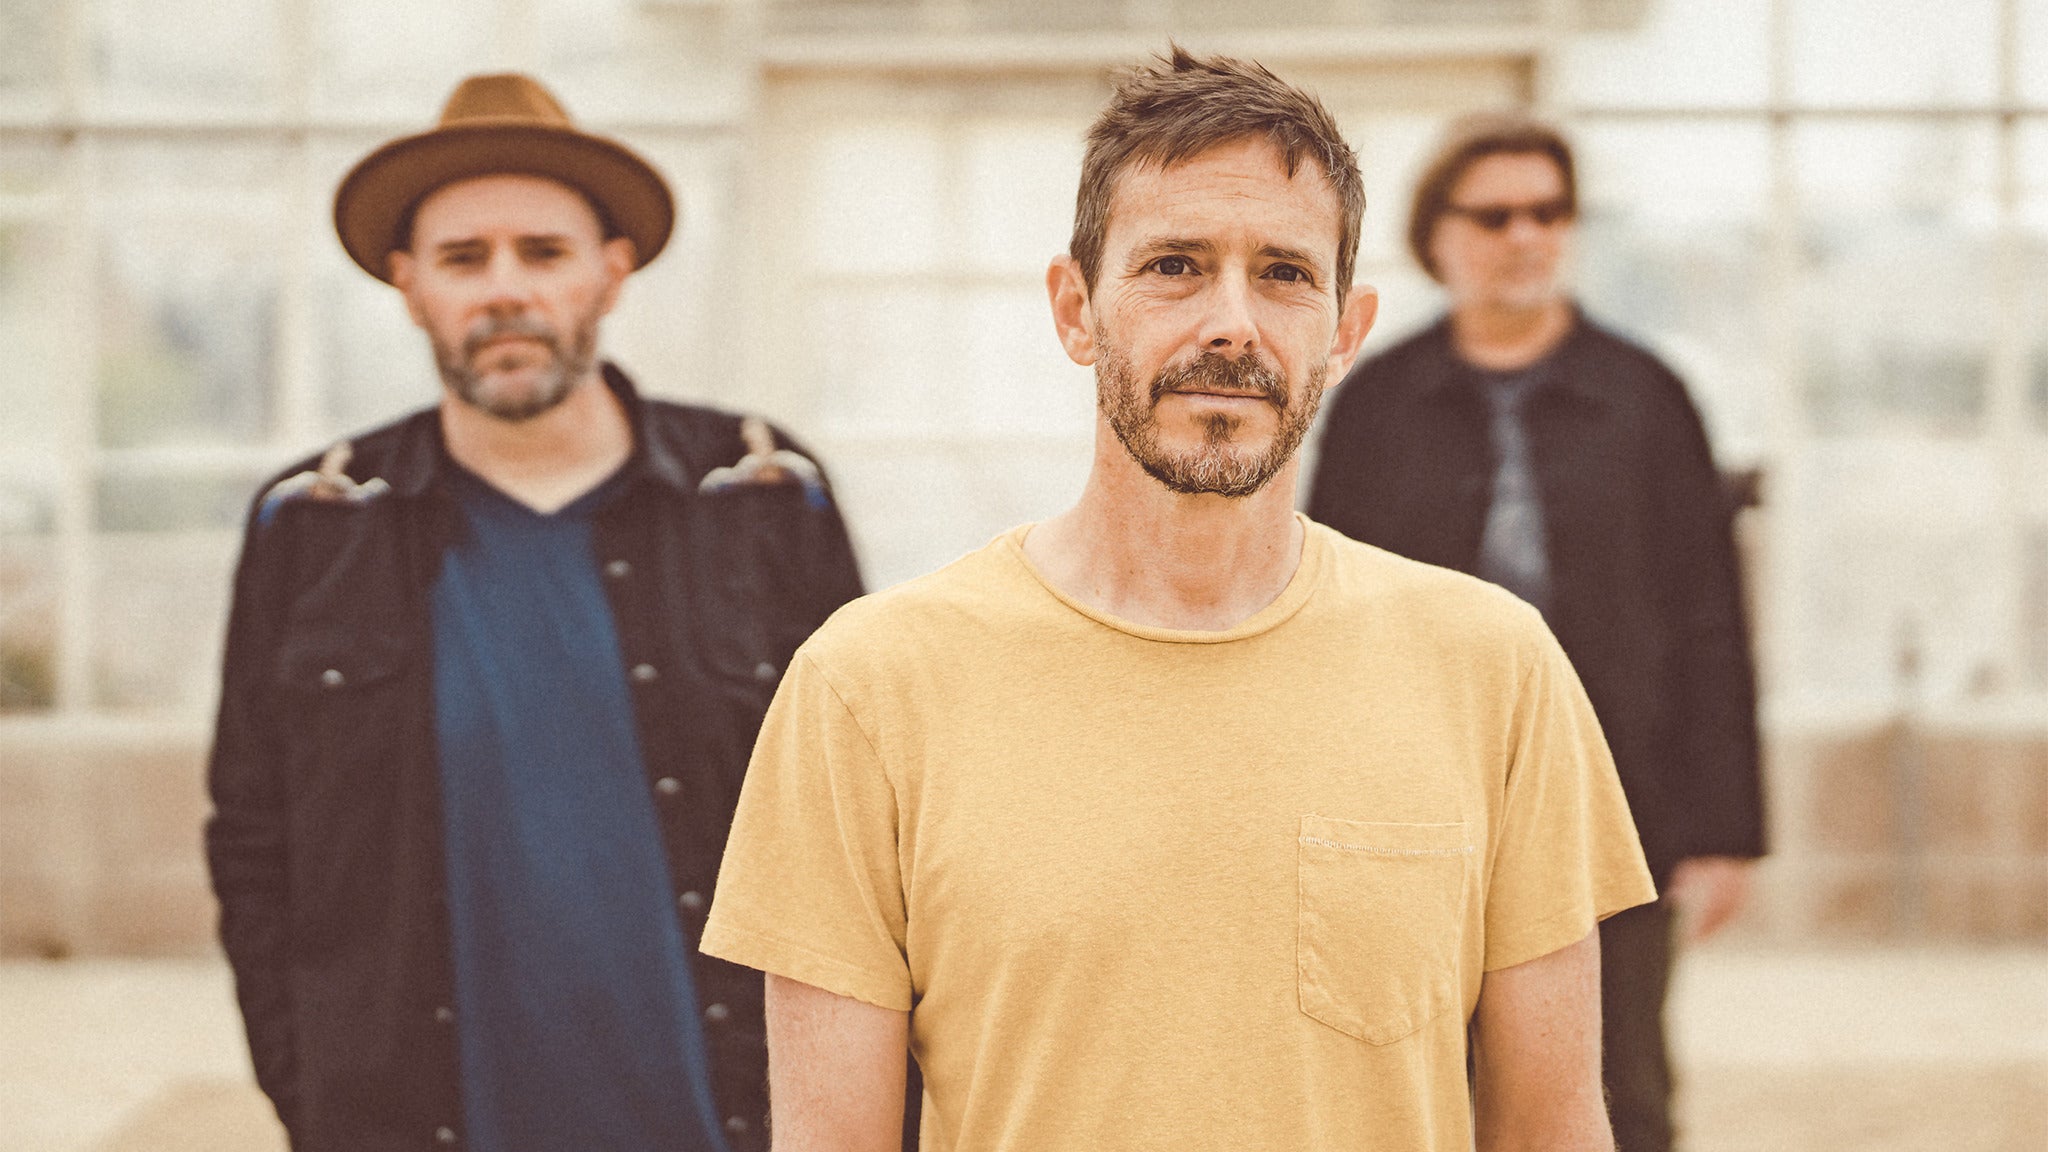 members only presale code for Toad the Wet Sprocket presale tickets in Dallas